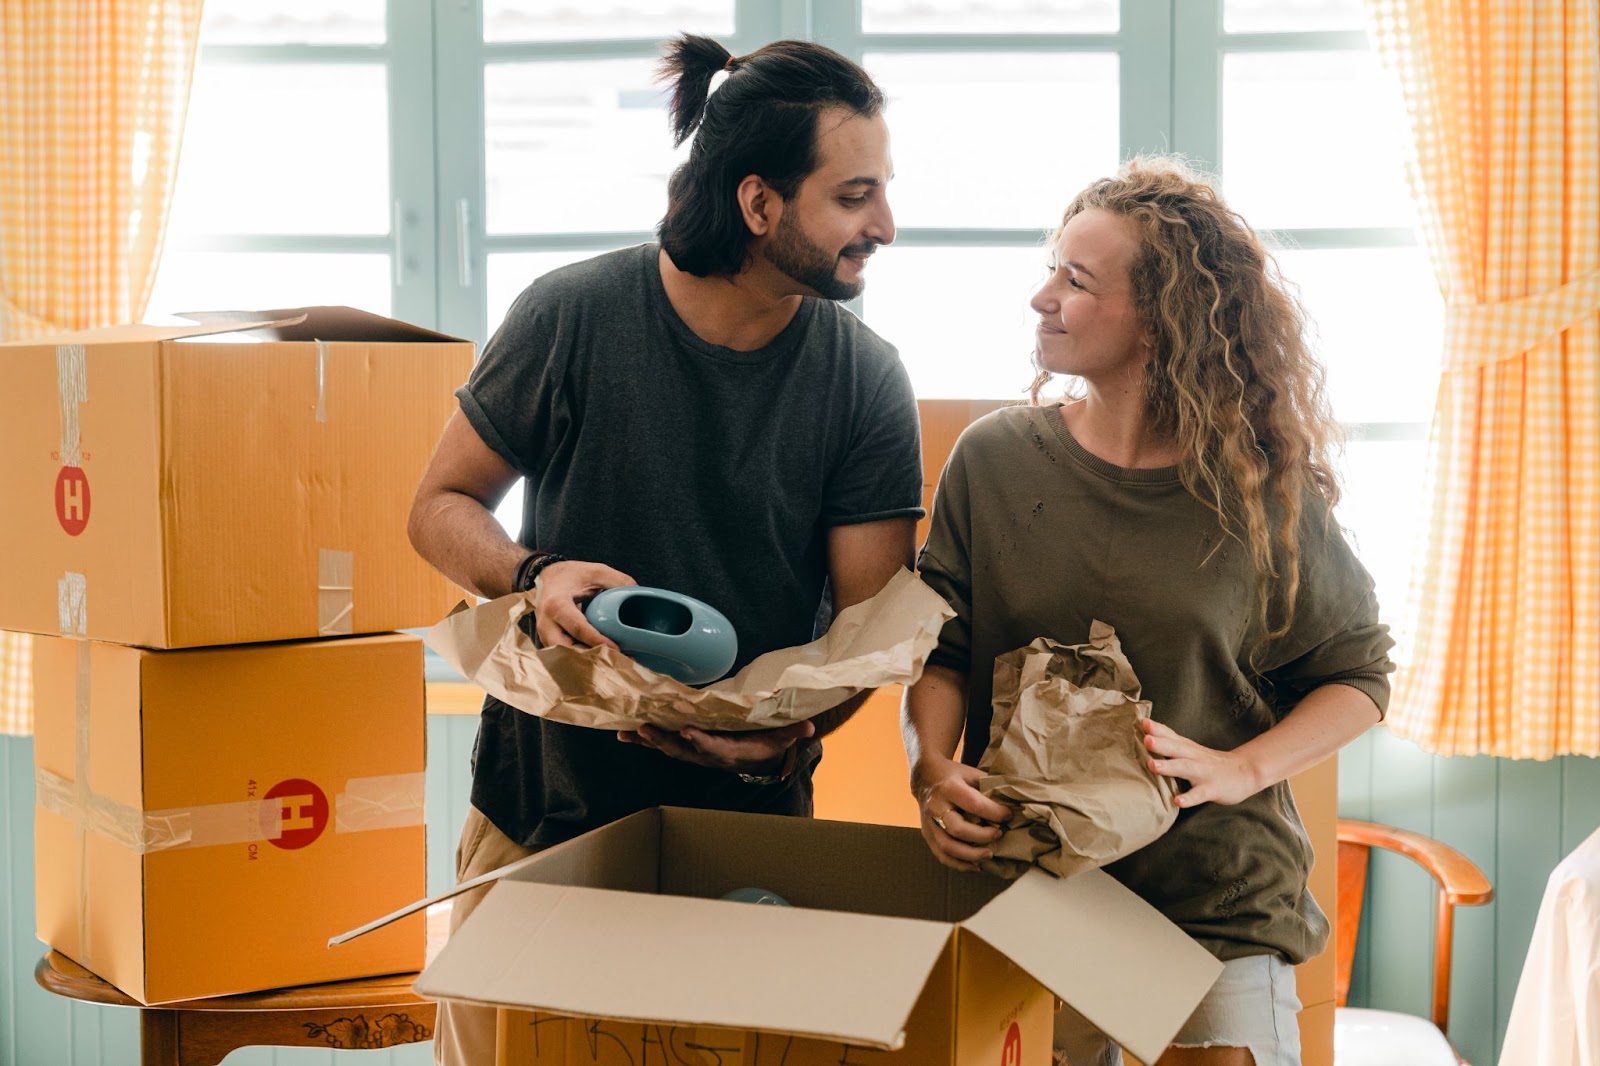 couple smiling at each other while unpacking boxes